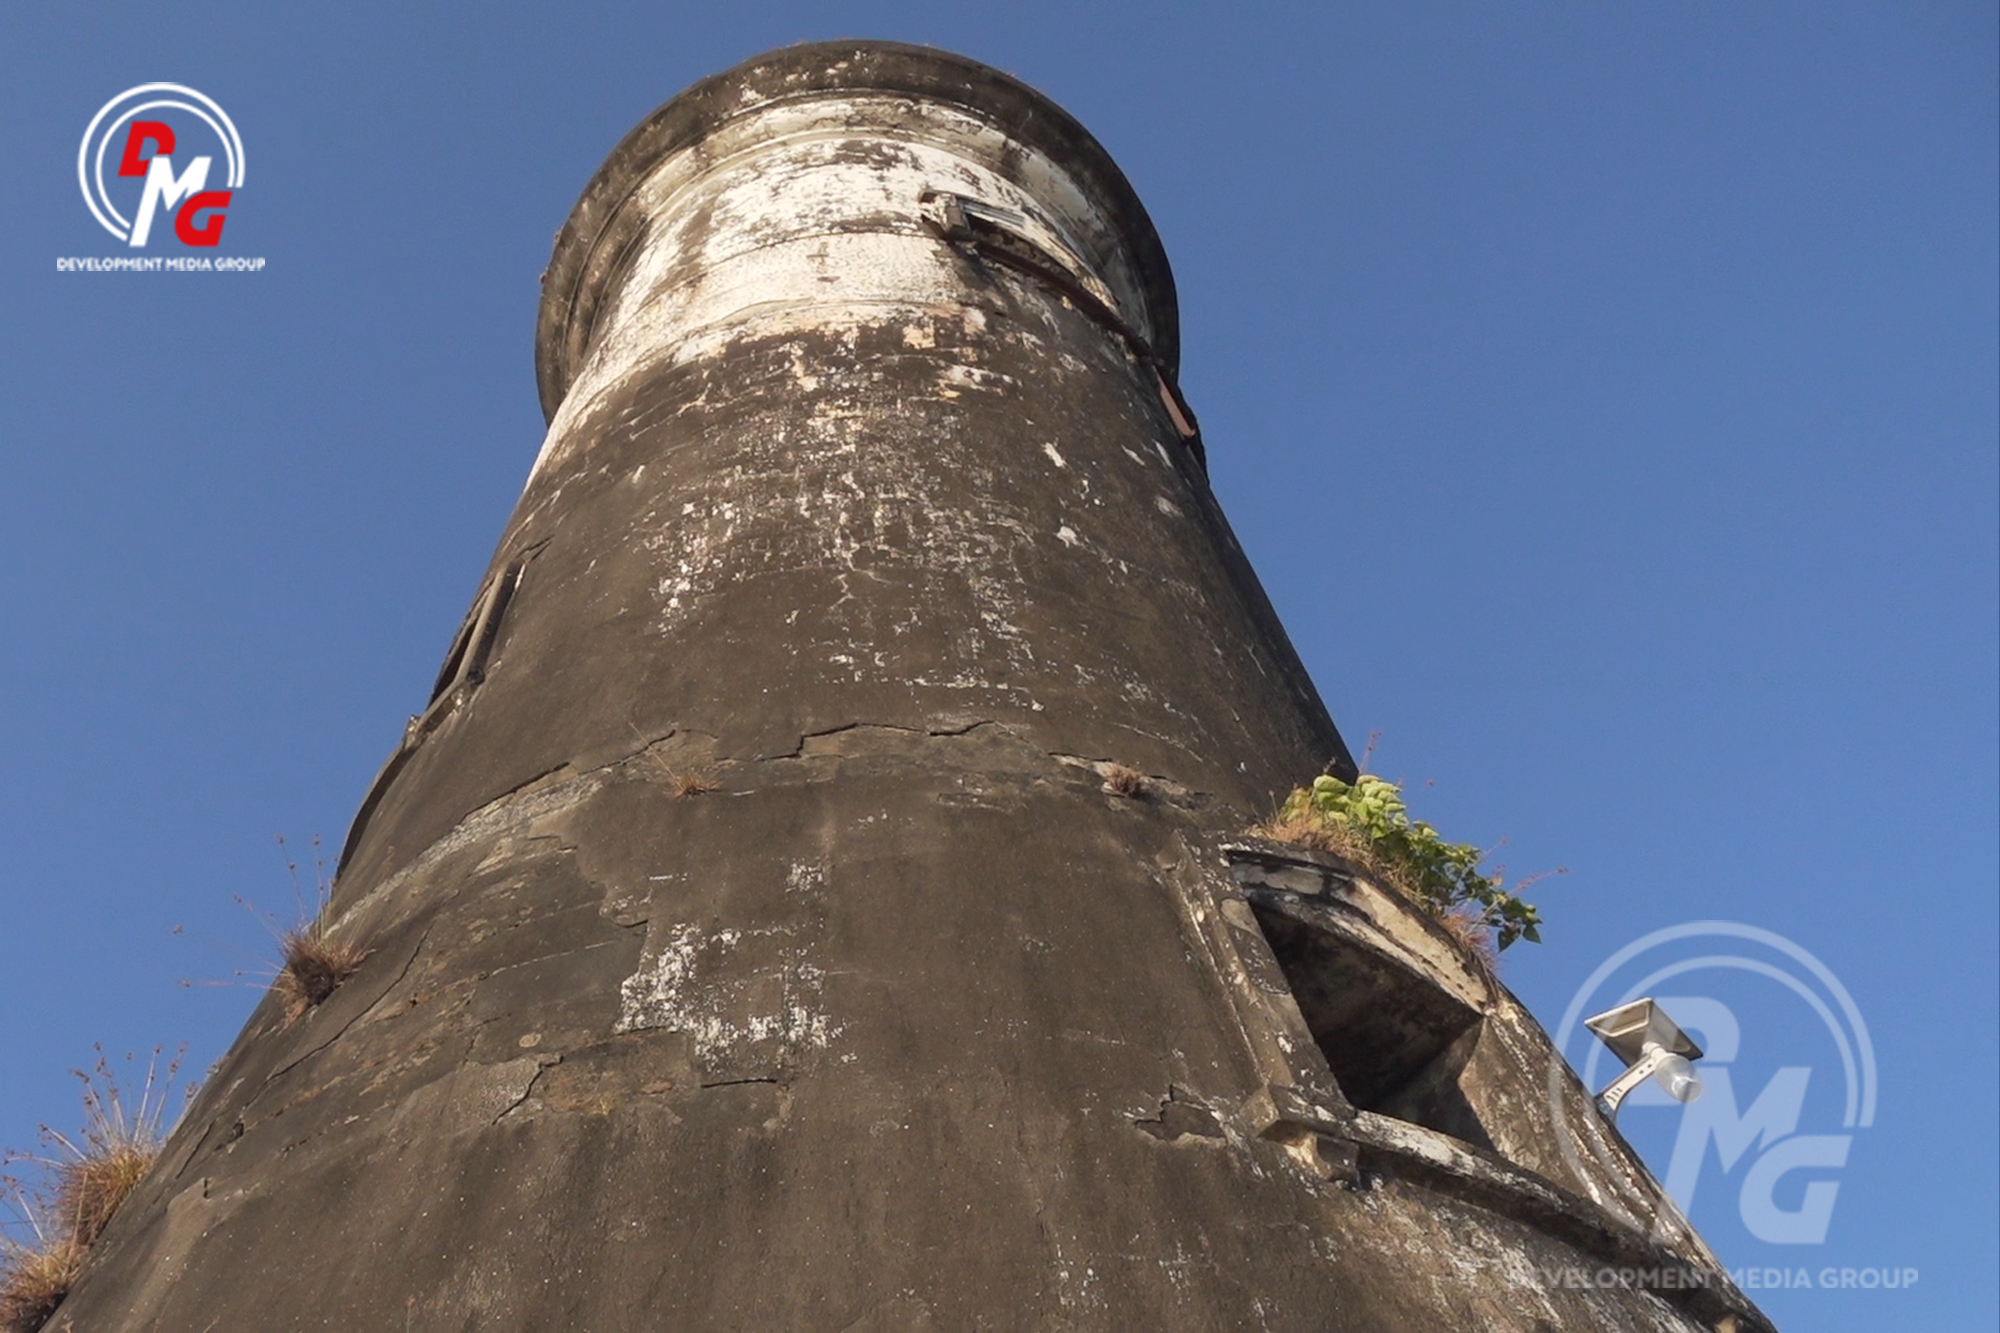 The Lay Shan Taung Lighthouse in Sittwe Township is pictured in December 2022.